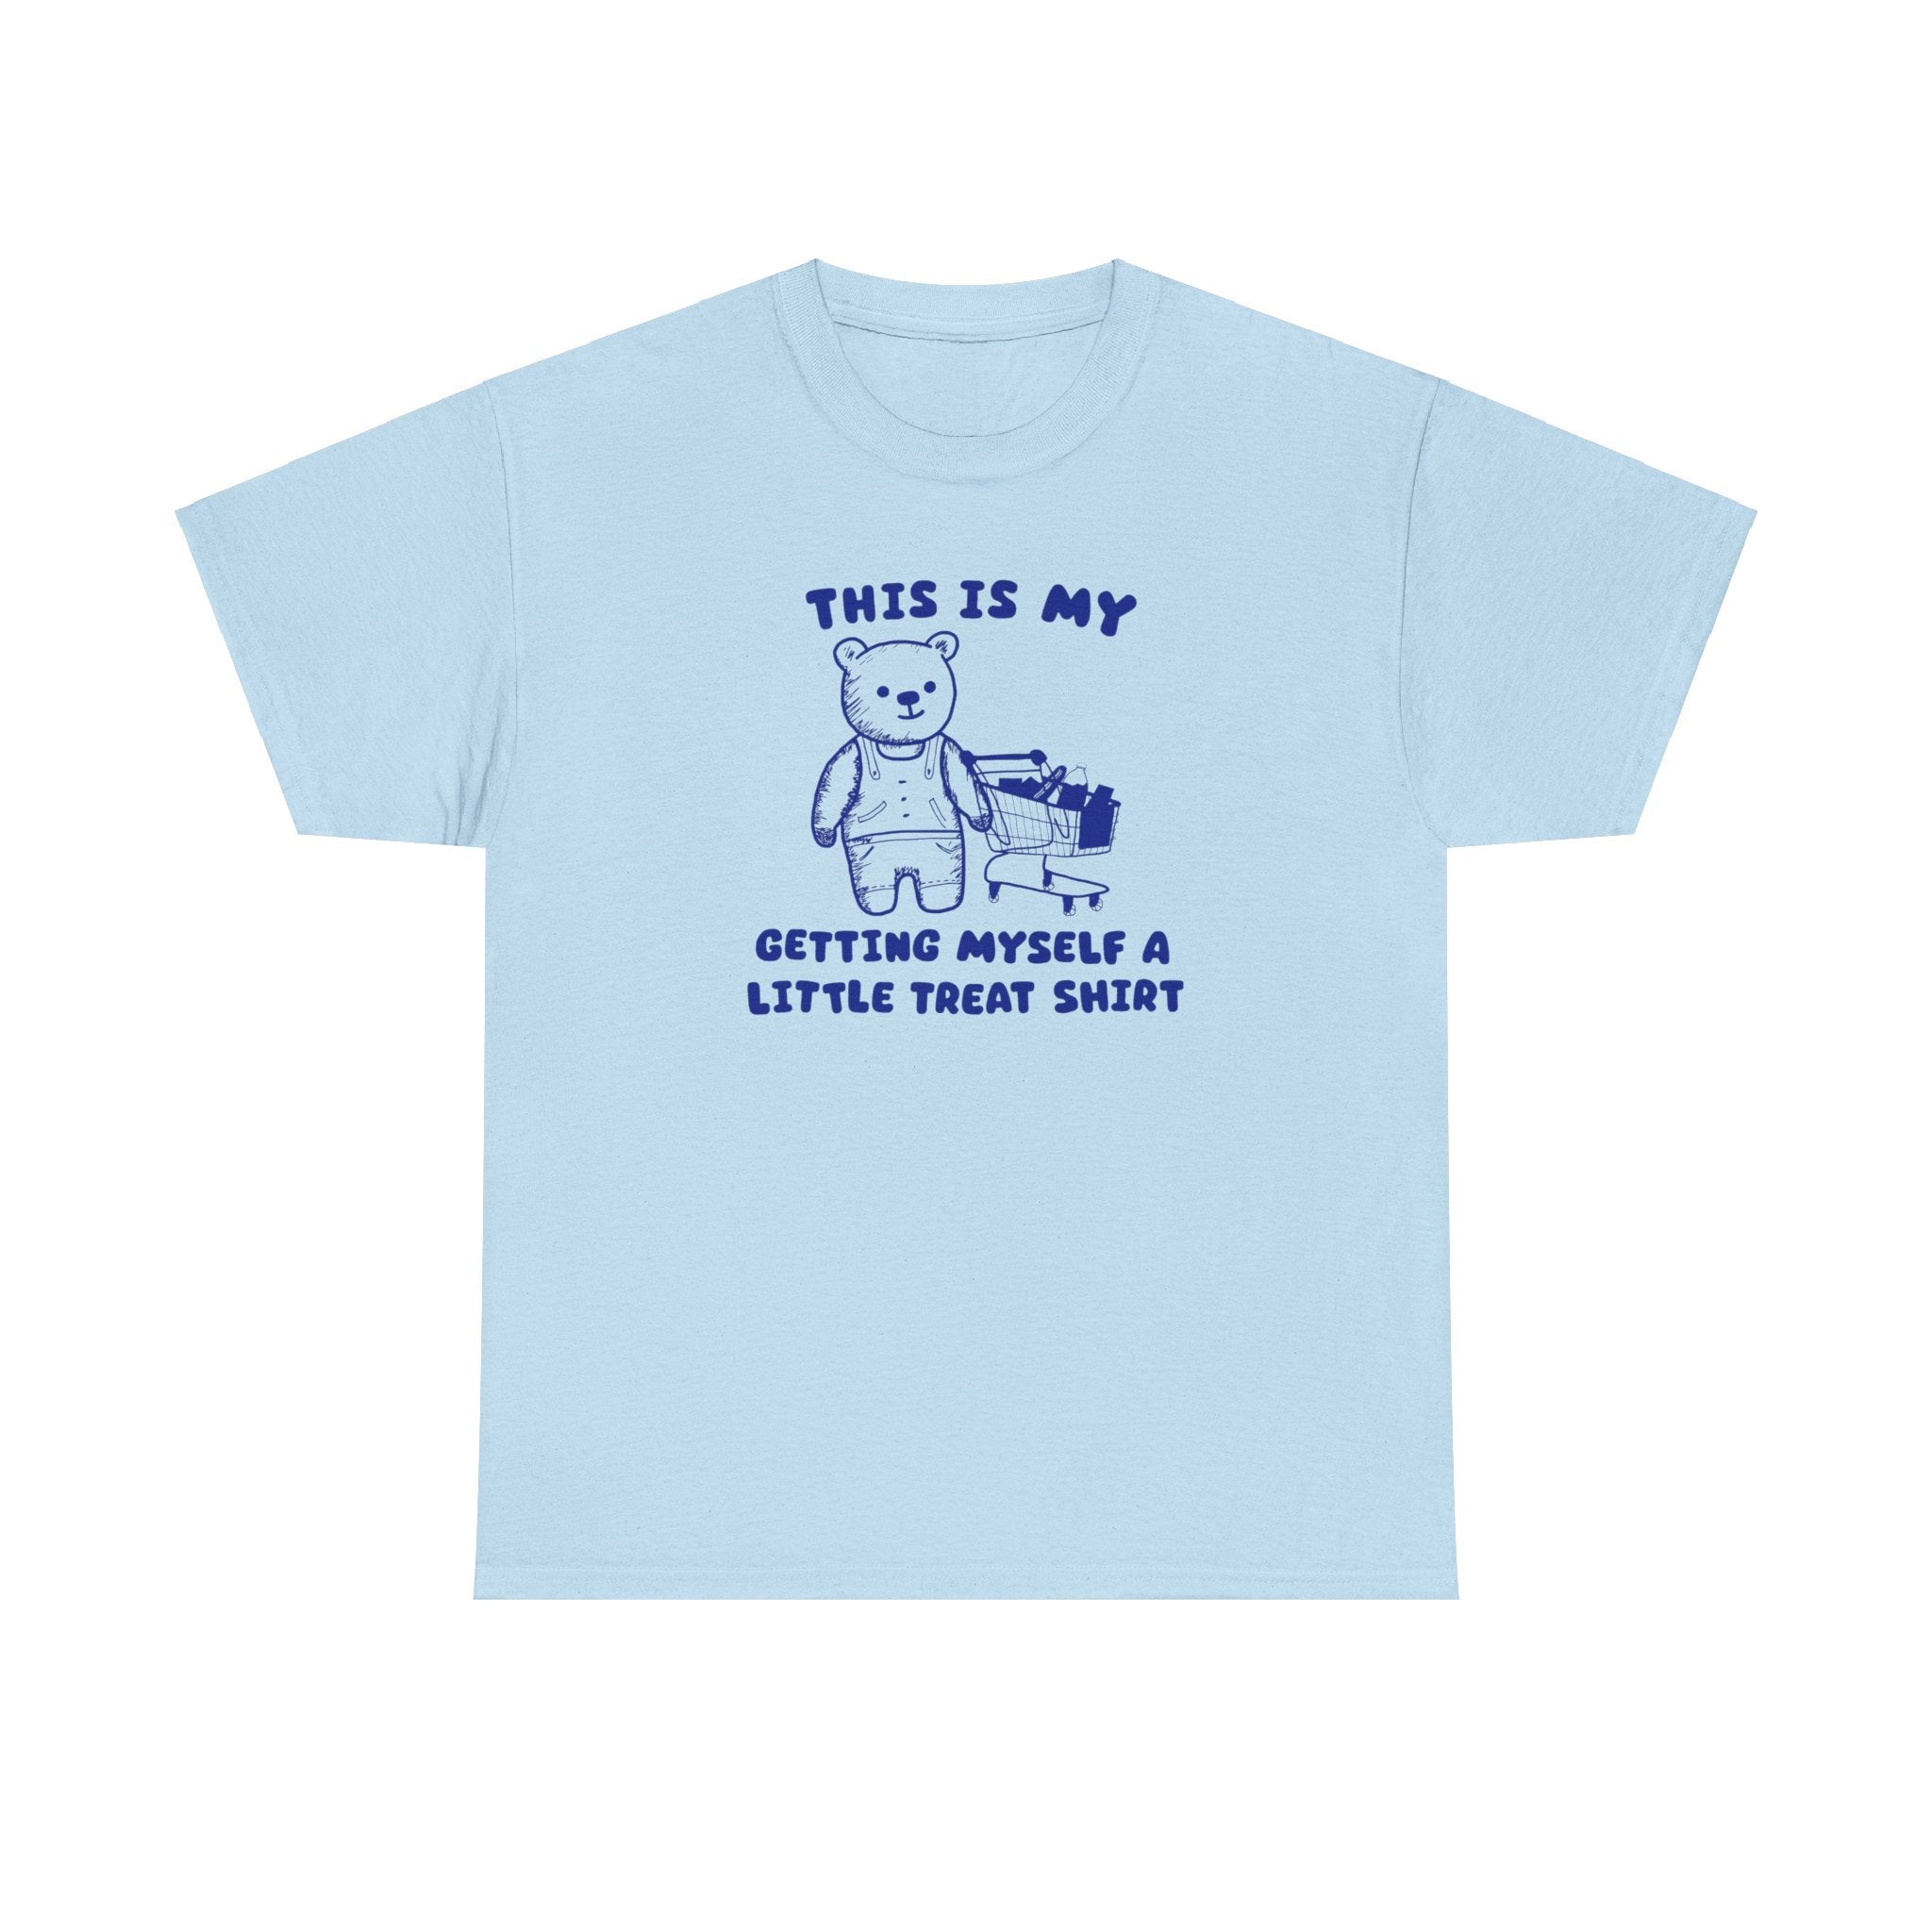 This is my getting myself a little treat shirt